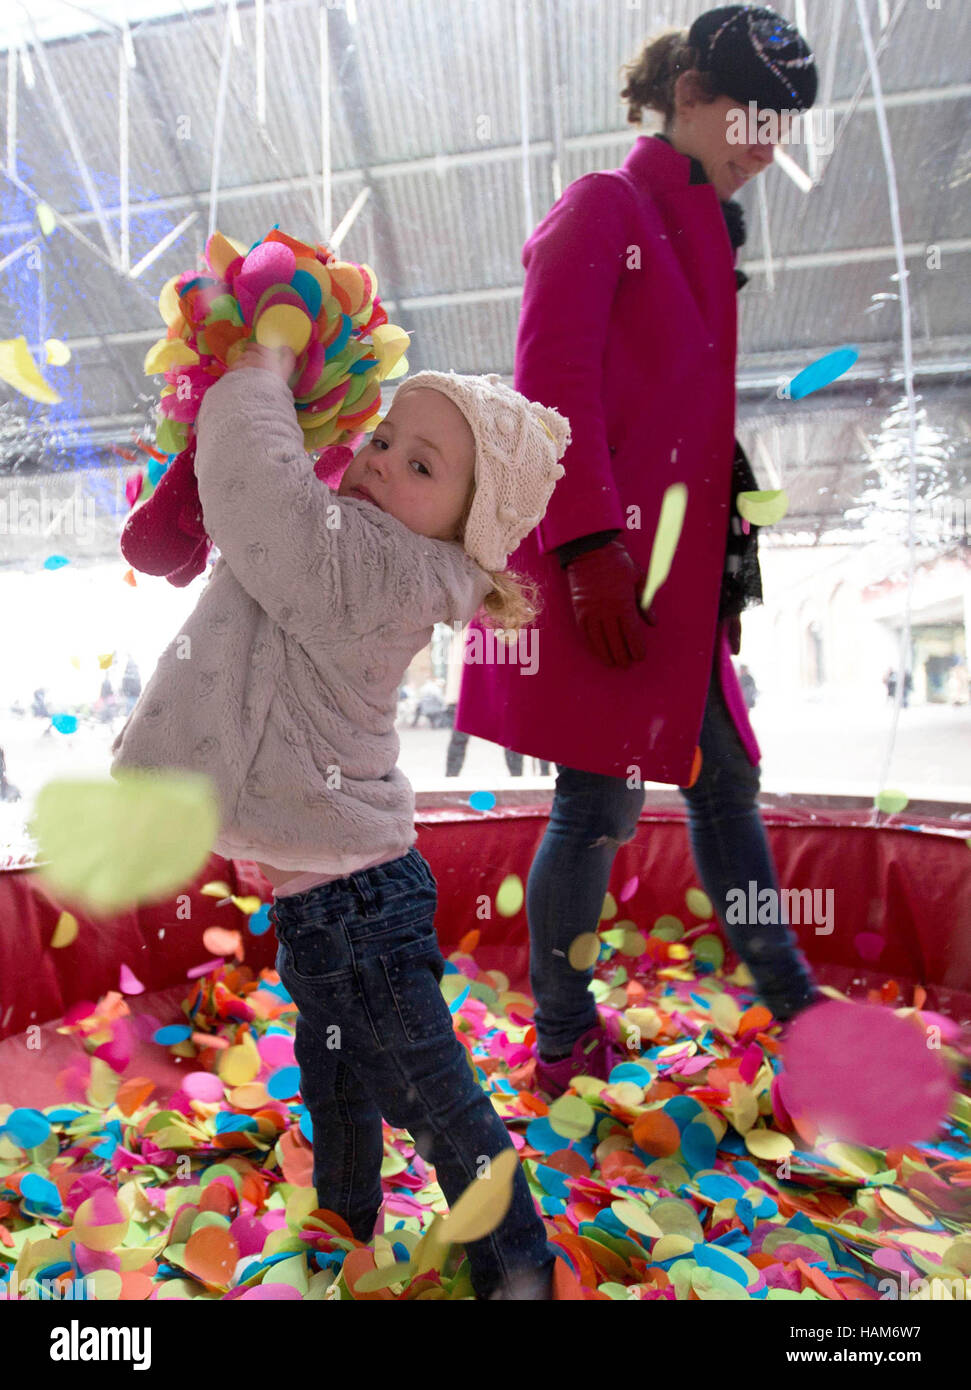 EDITORIAL USE ONLY Siobhan Fitzgerald and her daughter Aoife Cunnington play at an attraction unveiled by online shopping hub Notonthehighstreet.com in celebration of 'Colour Saturday', at King's Cross in London. Stock Photo